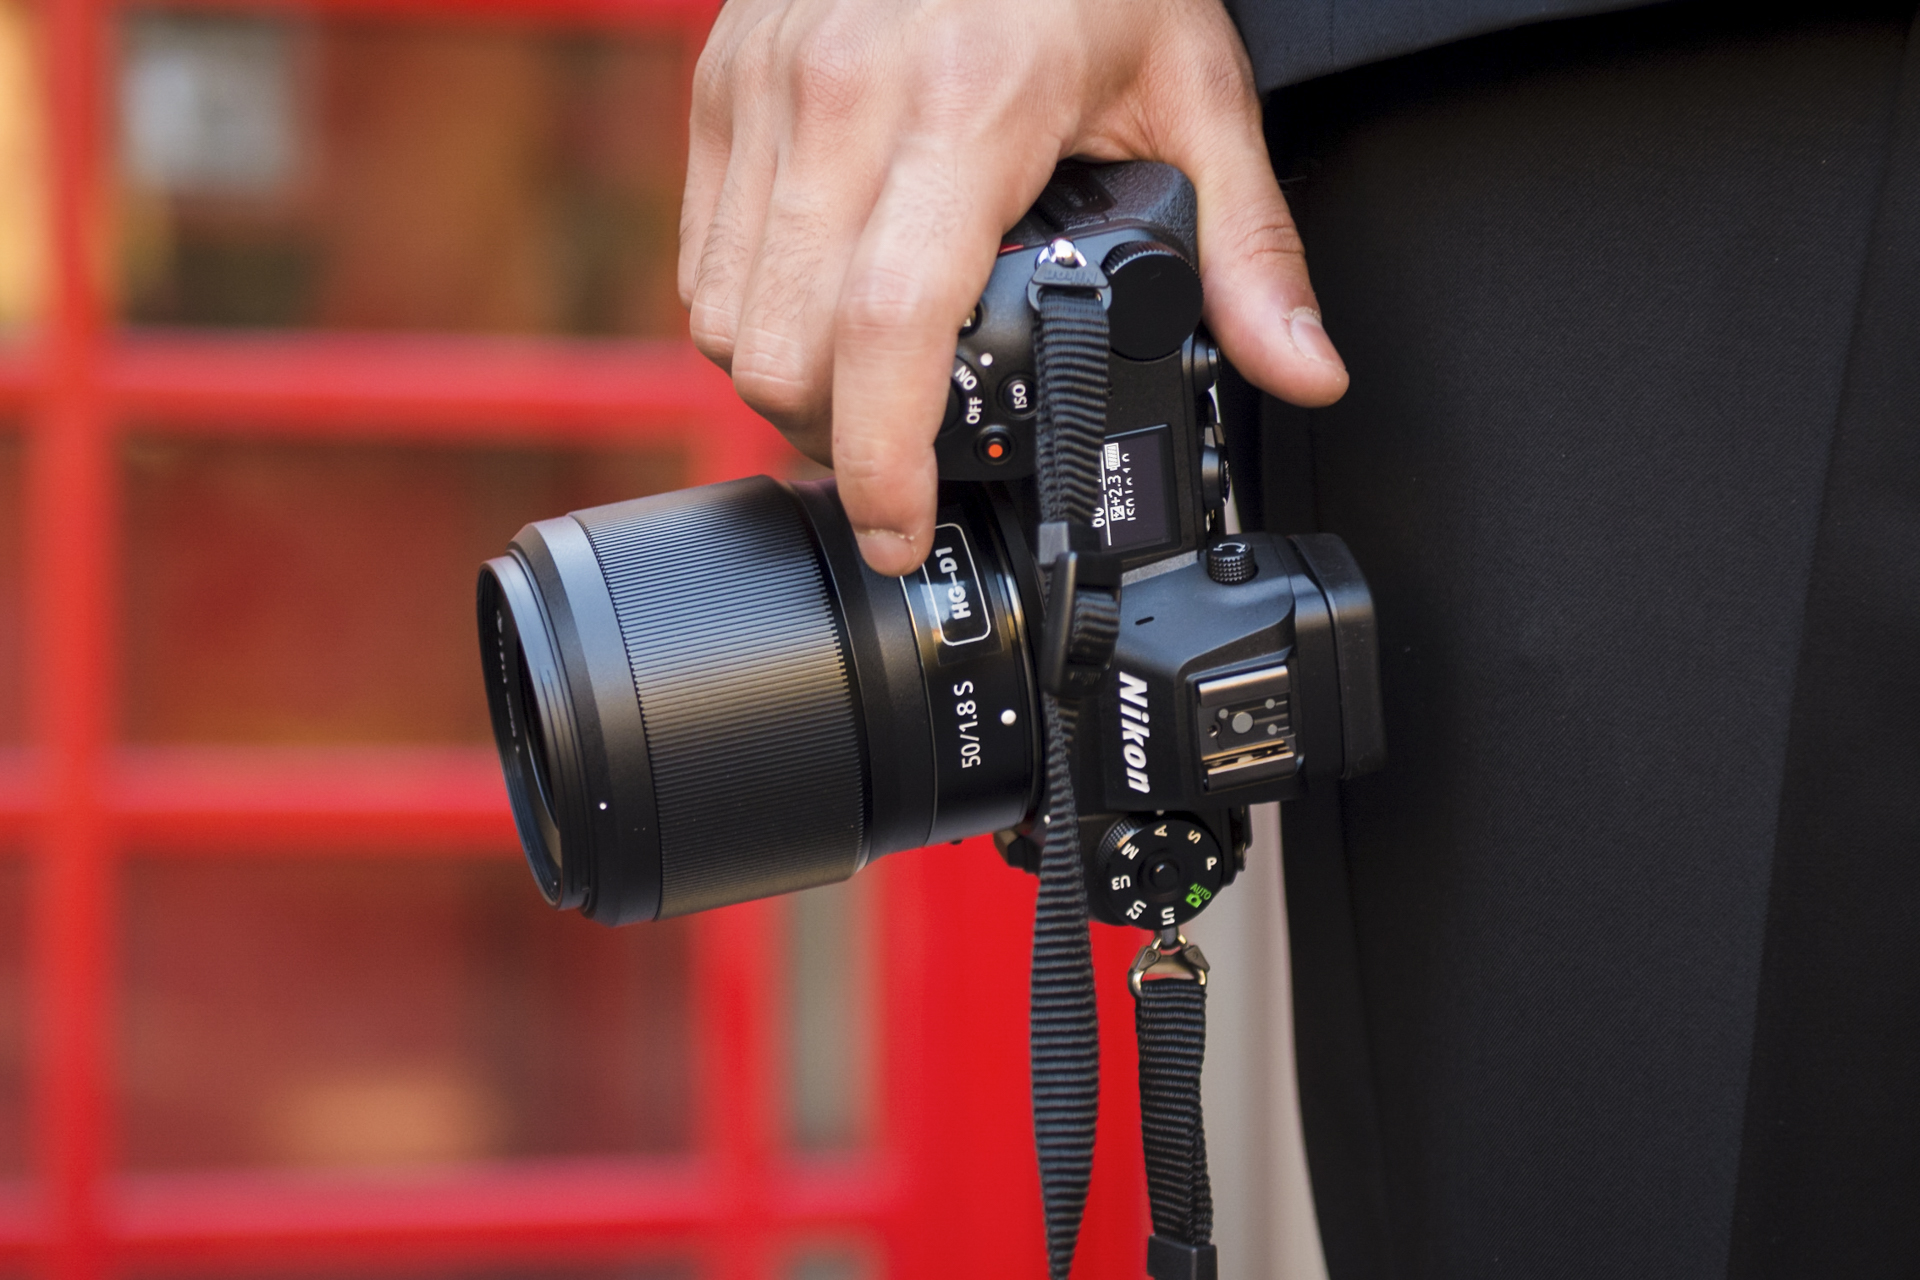 Nikon Z7 Hands-On: More Power to Professional Photographers